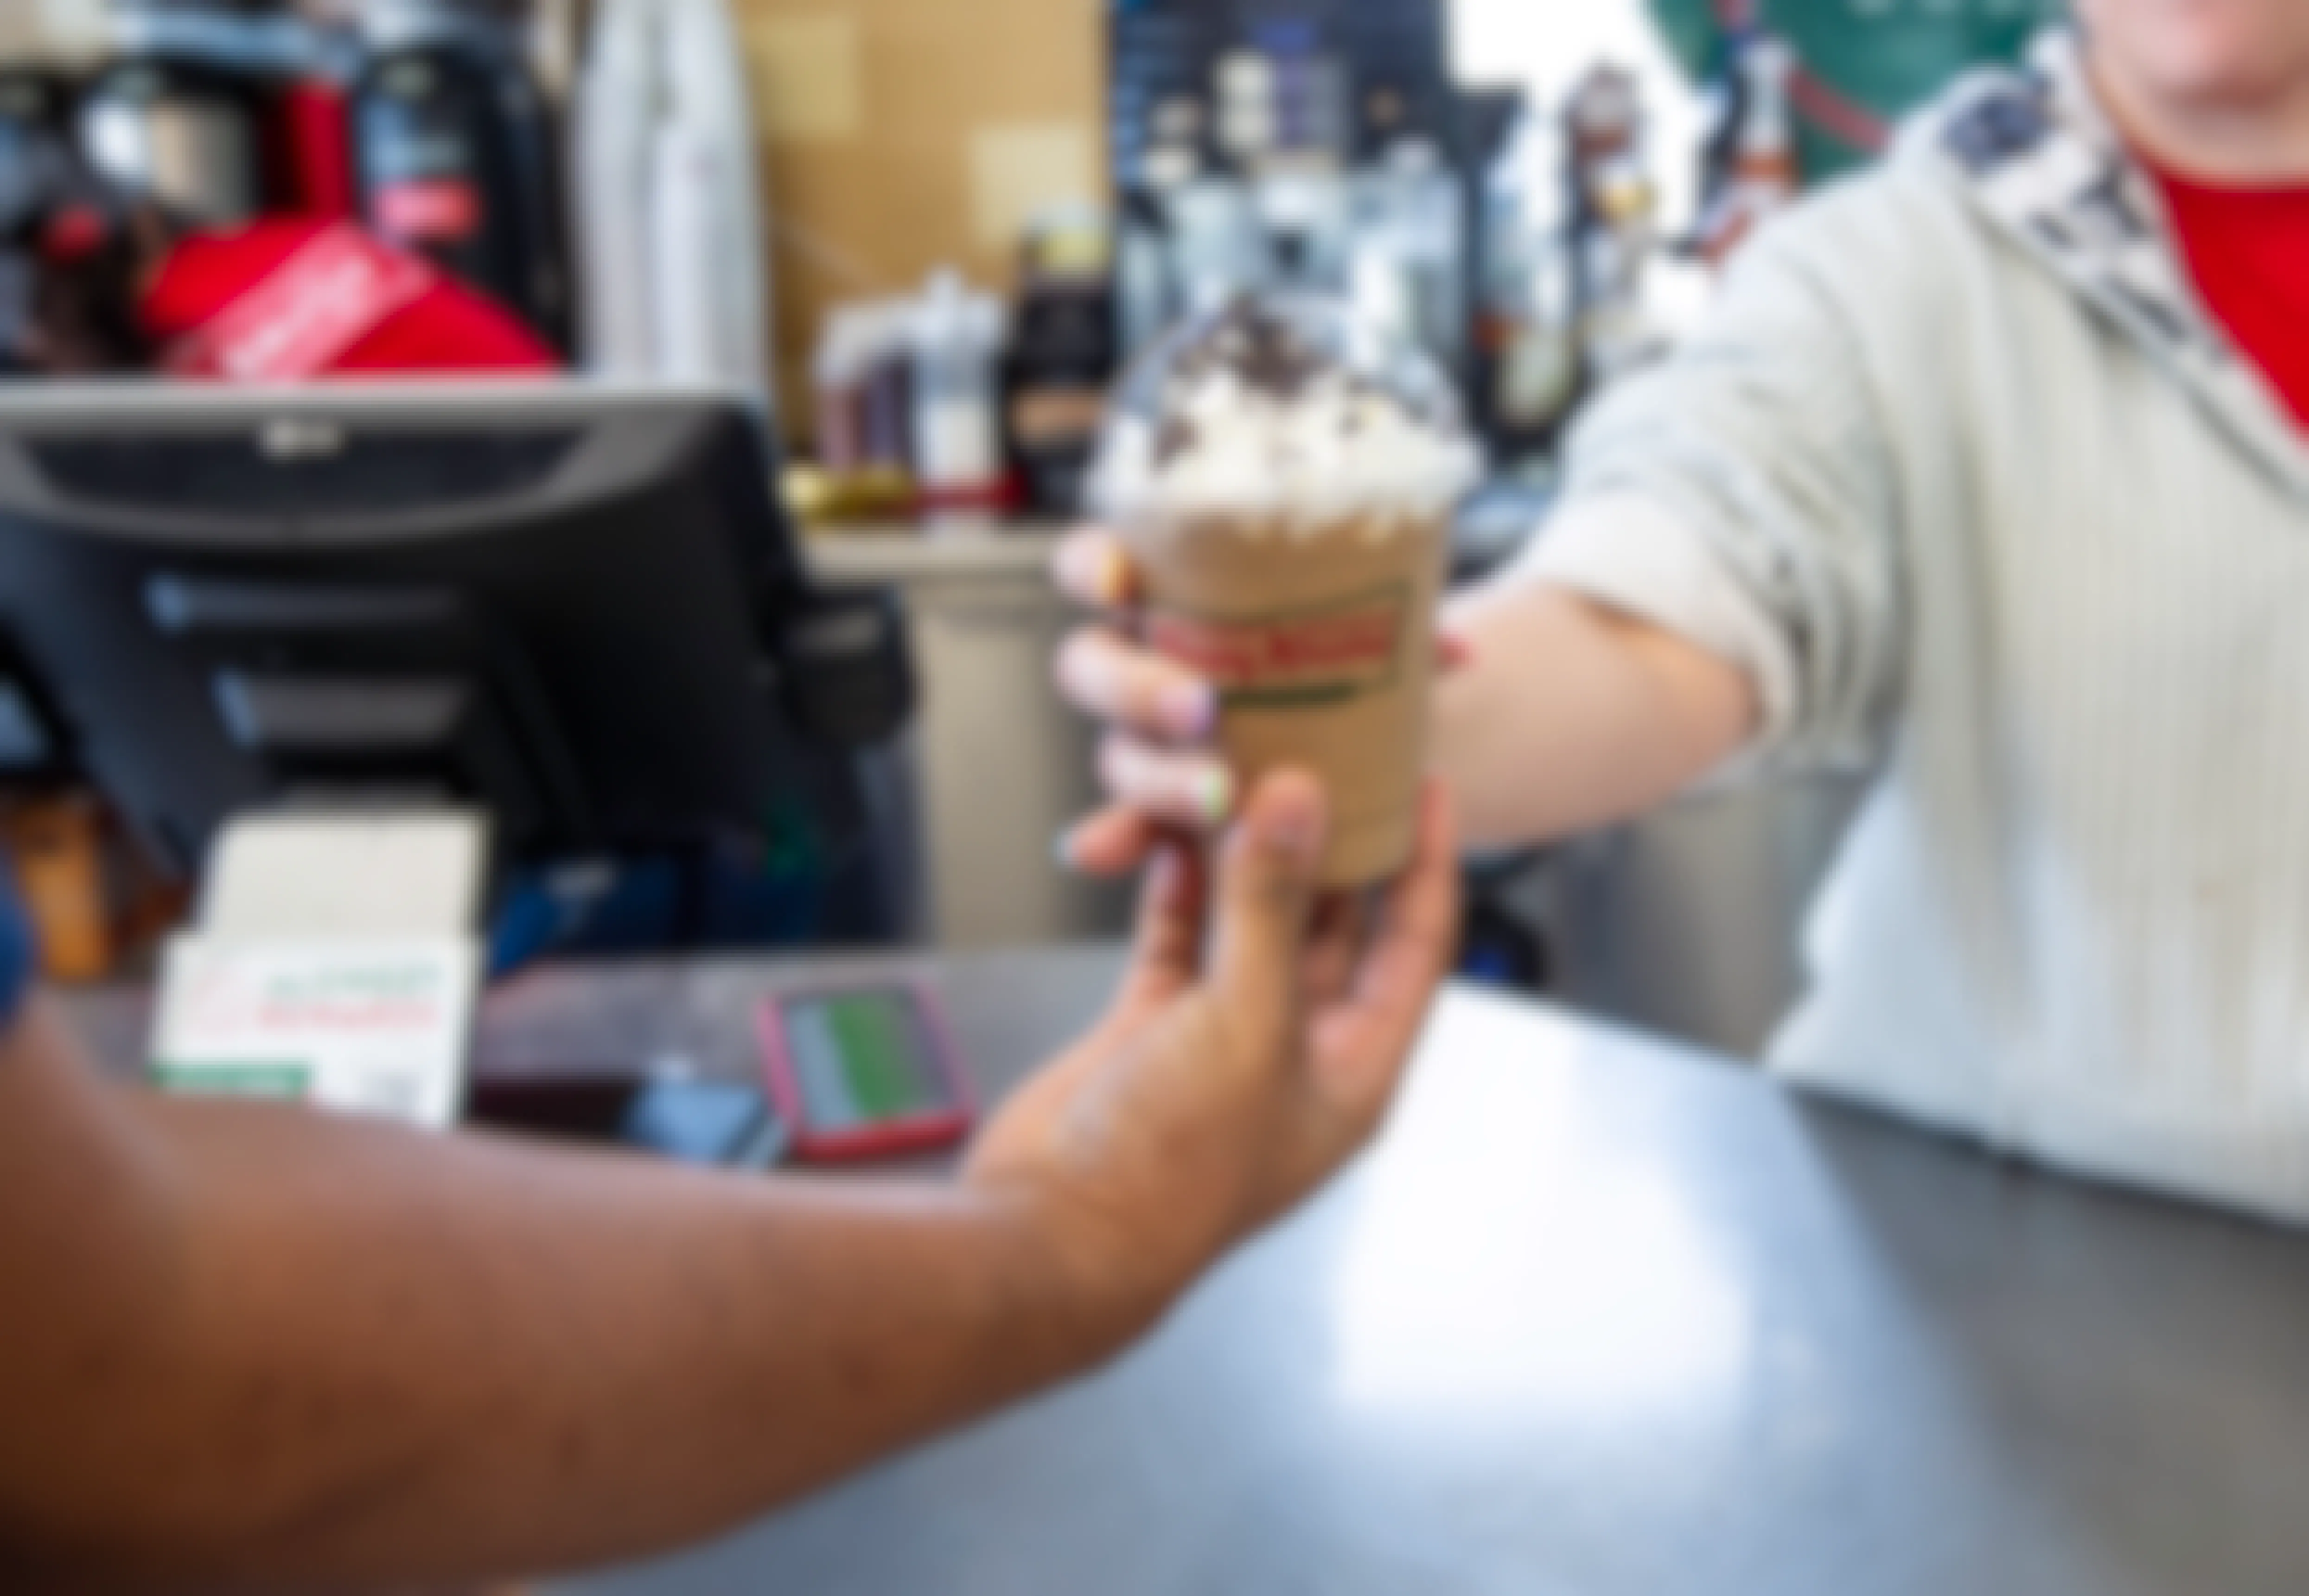 Employee handing over a limited edition oreo mocha latte to a customer